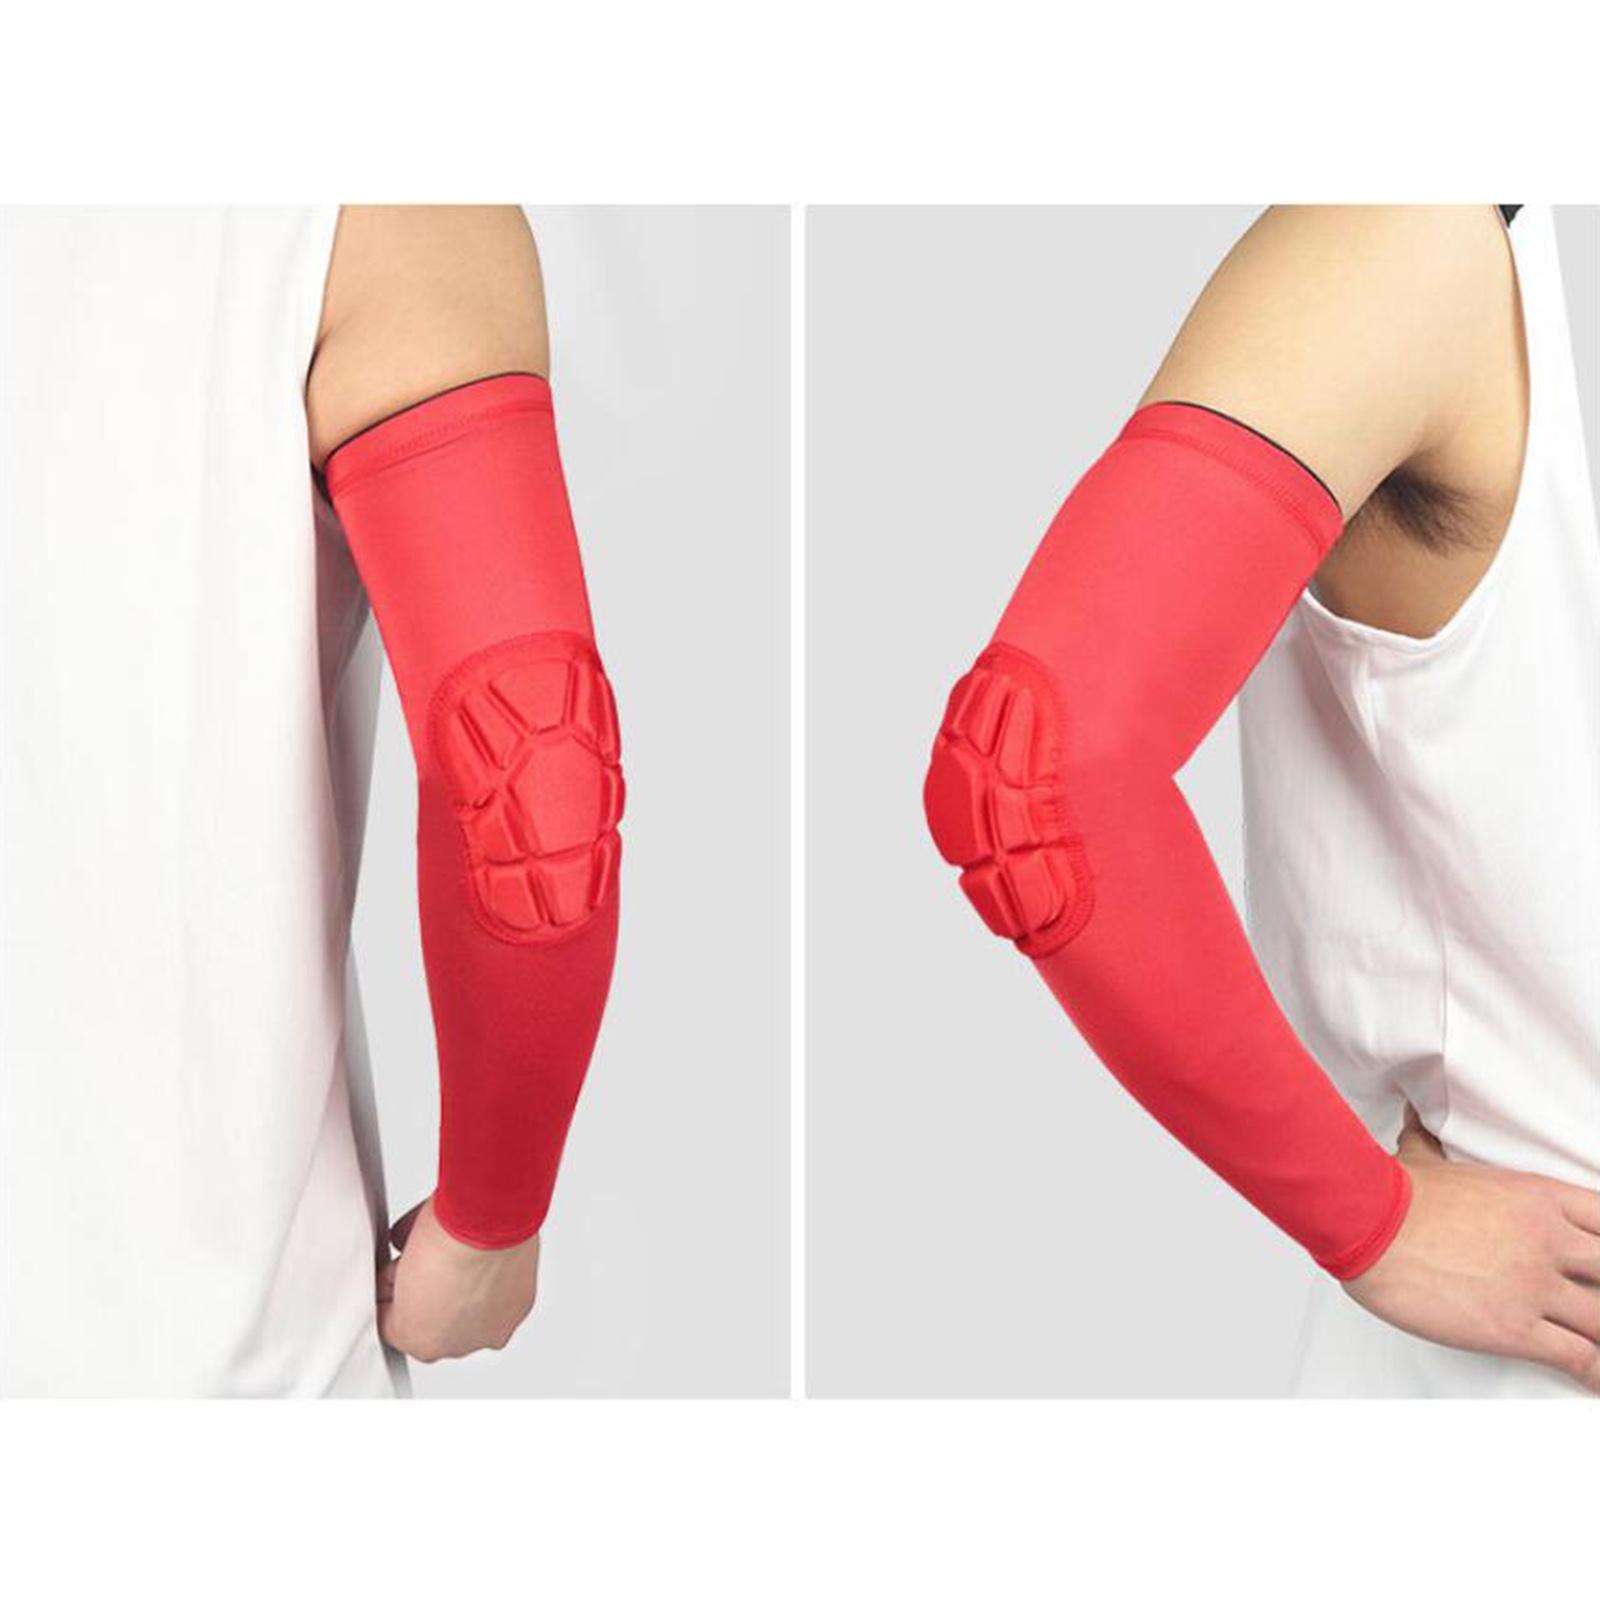 Elbow Support Compression Honeycomb Pad Brace Joint Arm Sleeve Sport Red L